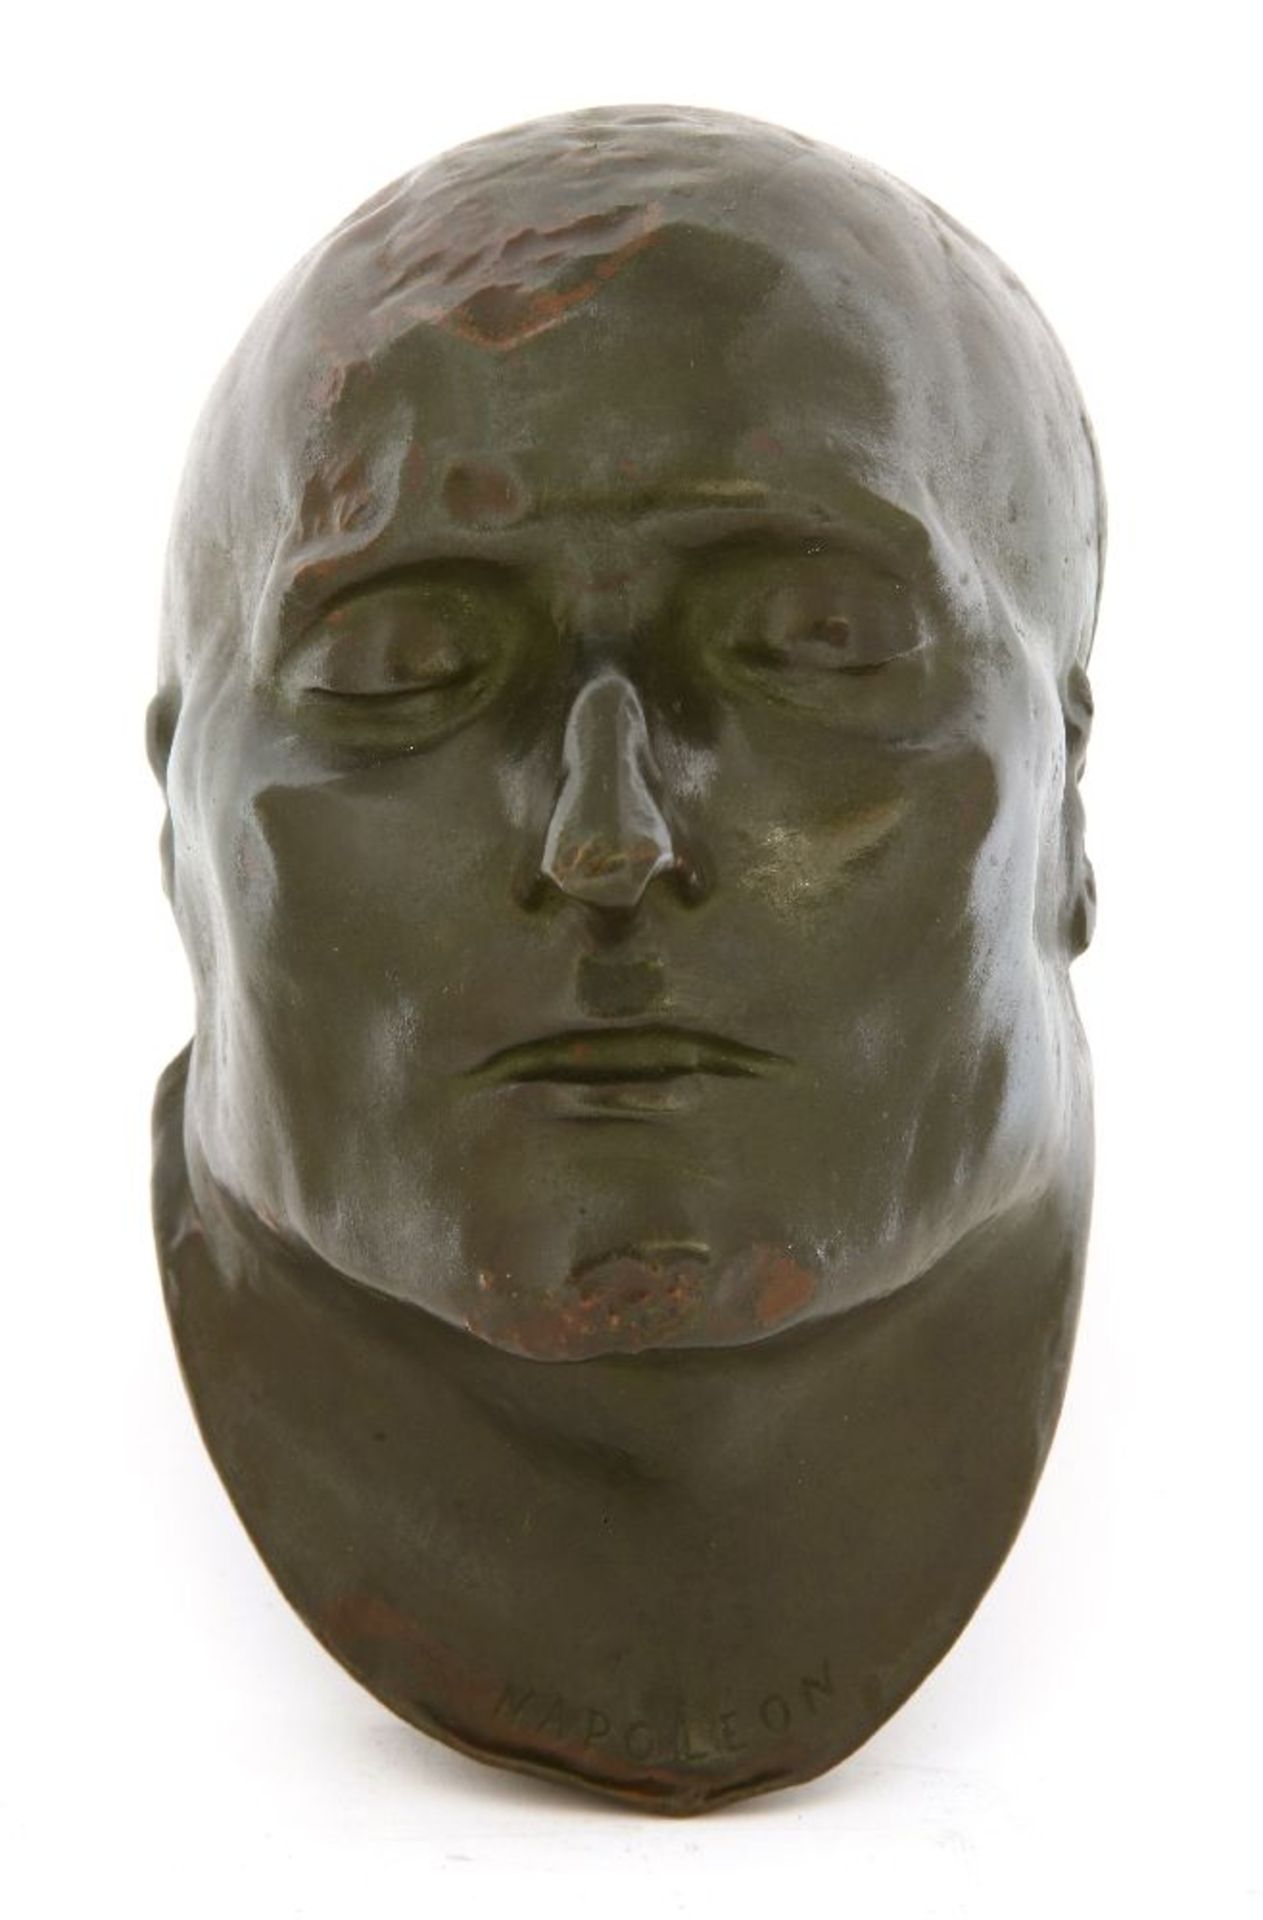 NAPOLEON'S DEATH MASK ELECTROTYPE,mid to late 19th century, with bronzed finish, after Francois - Image 4 of 4